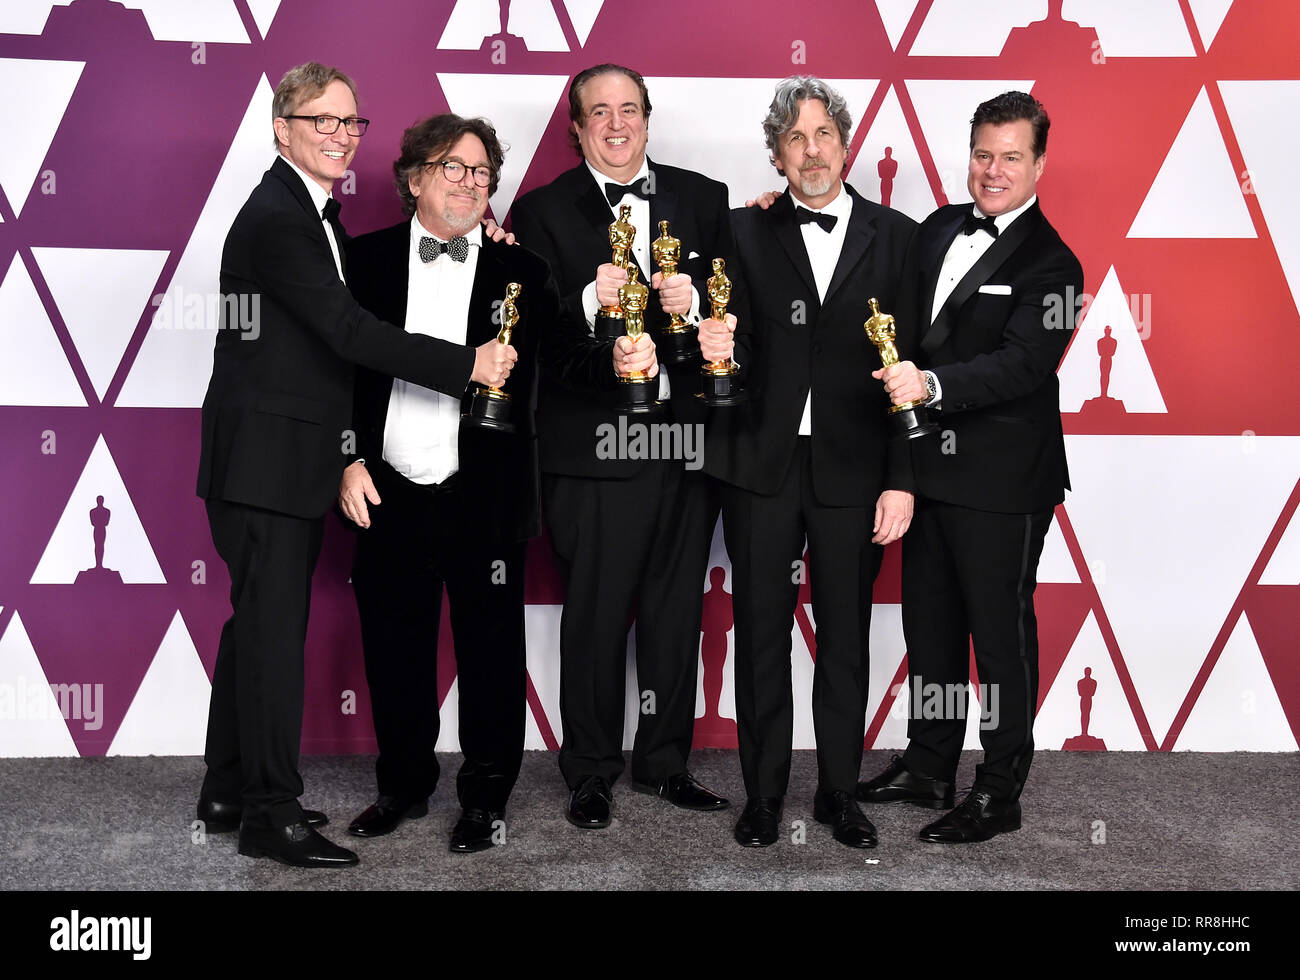 Jim Burke, Charles B. Wessler, Nick Vallelonga, Peter Farrelly, and Brian Currie, winners of Best Picture for Green Book in the press room at the 91st Academy Awards held at the Dolby Theatre in Hollywood, Los Angeles, USA. Stock Photo